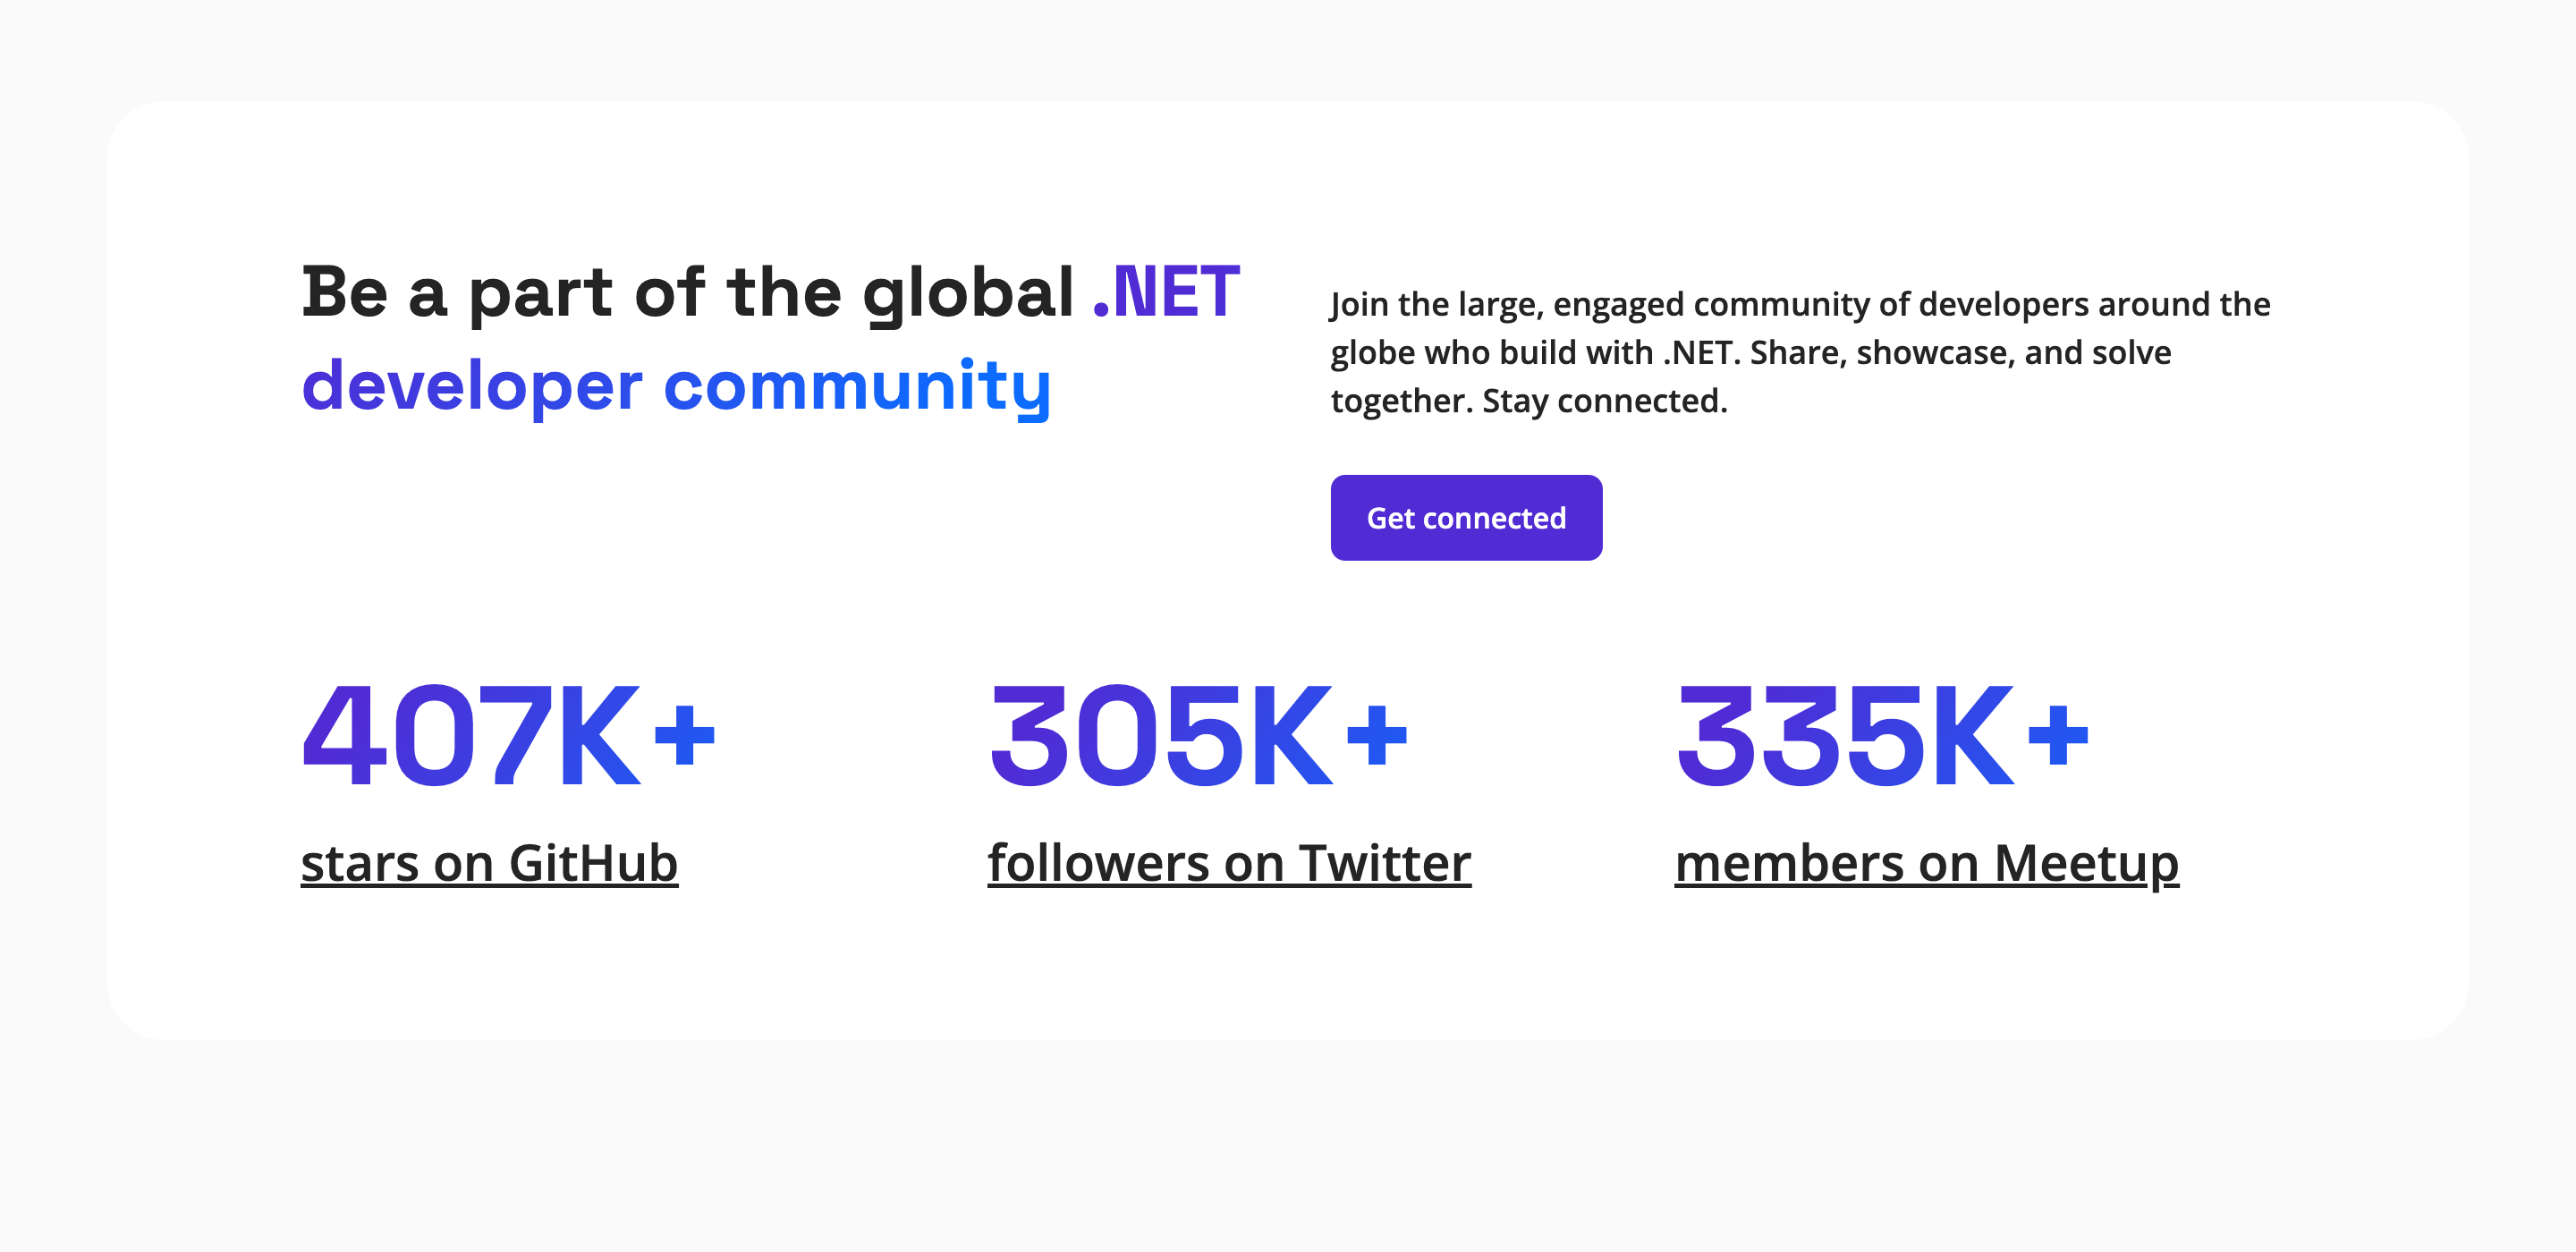 Screenshot of a large card with some text promoting the .NET community with a button saying "Get connected." Three large numbers are presented in a blue-purple gradient showing GitHub stars, Twitter followers, and Meetup members.